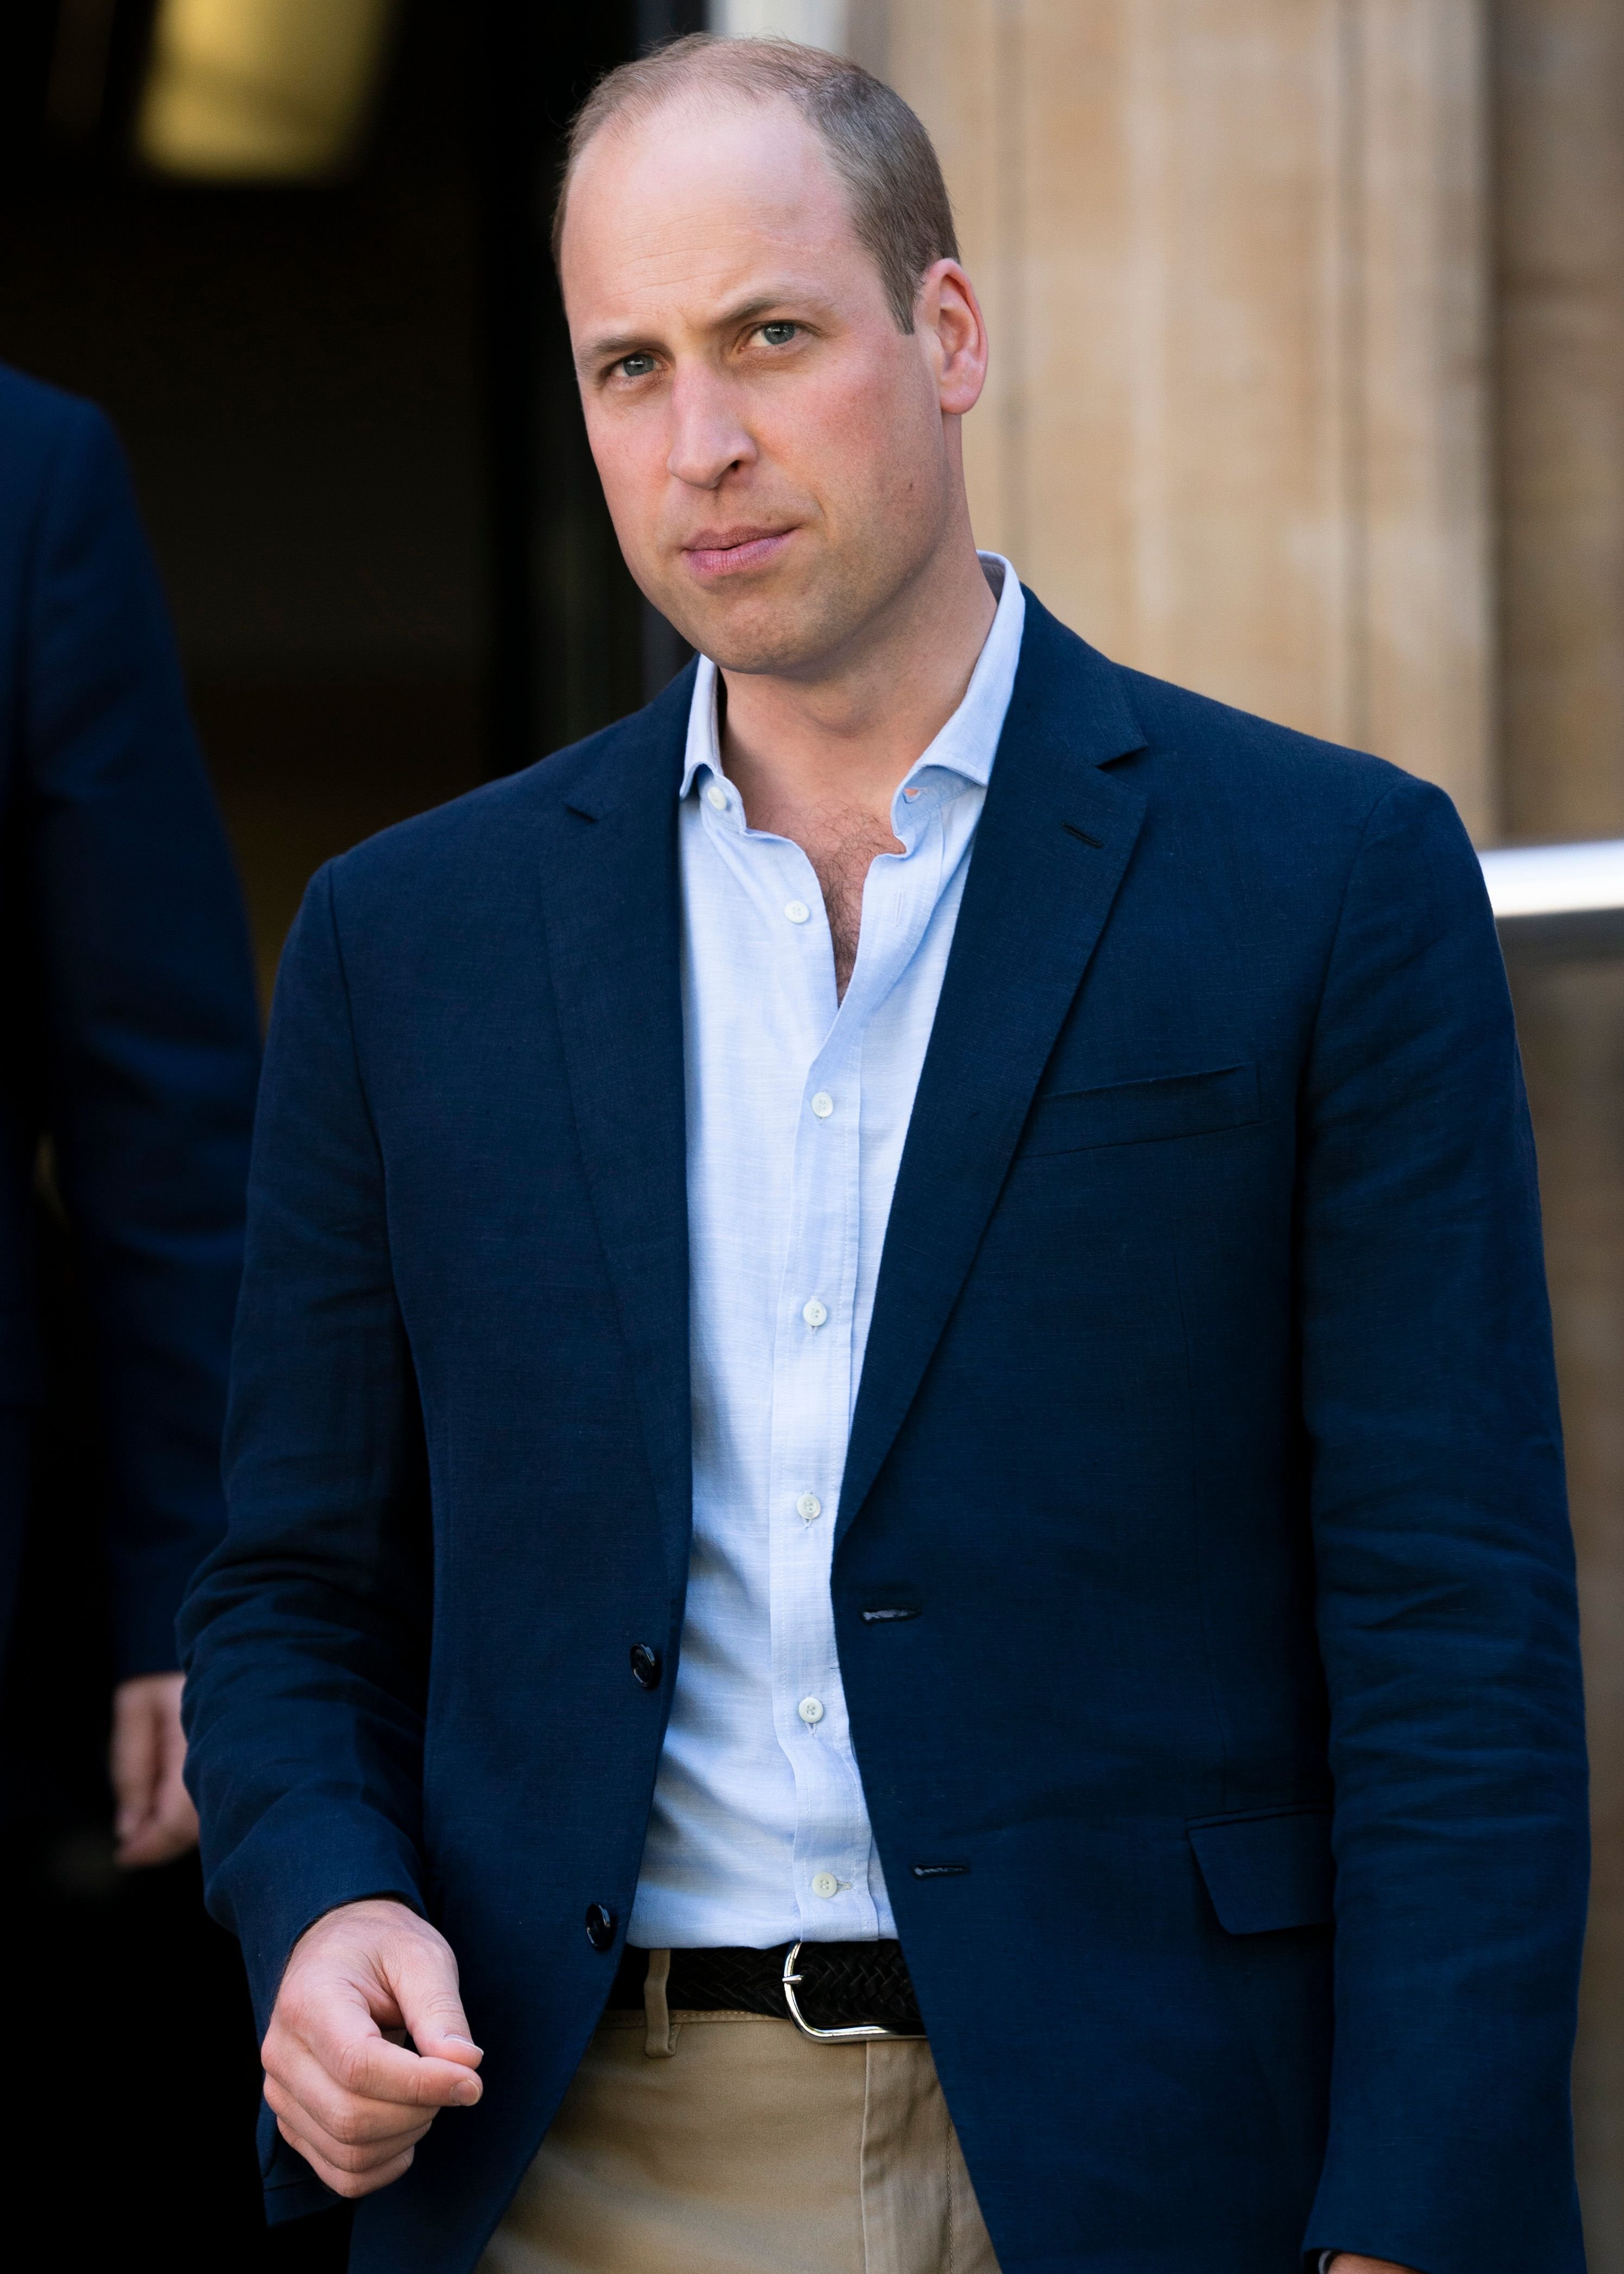 Prince William visits the Royal Marsden on July 04, 2019, in London, United Kingdom | Photo: Ming Yeung/Getty Images